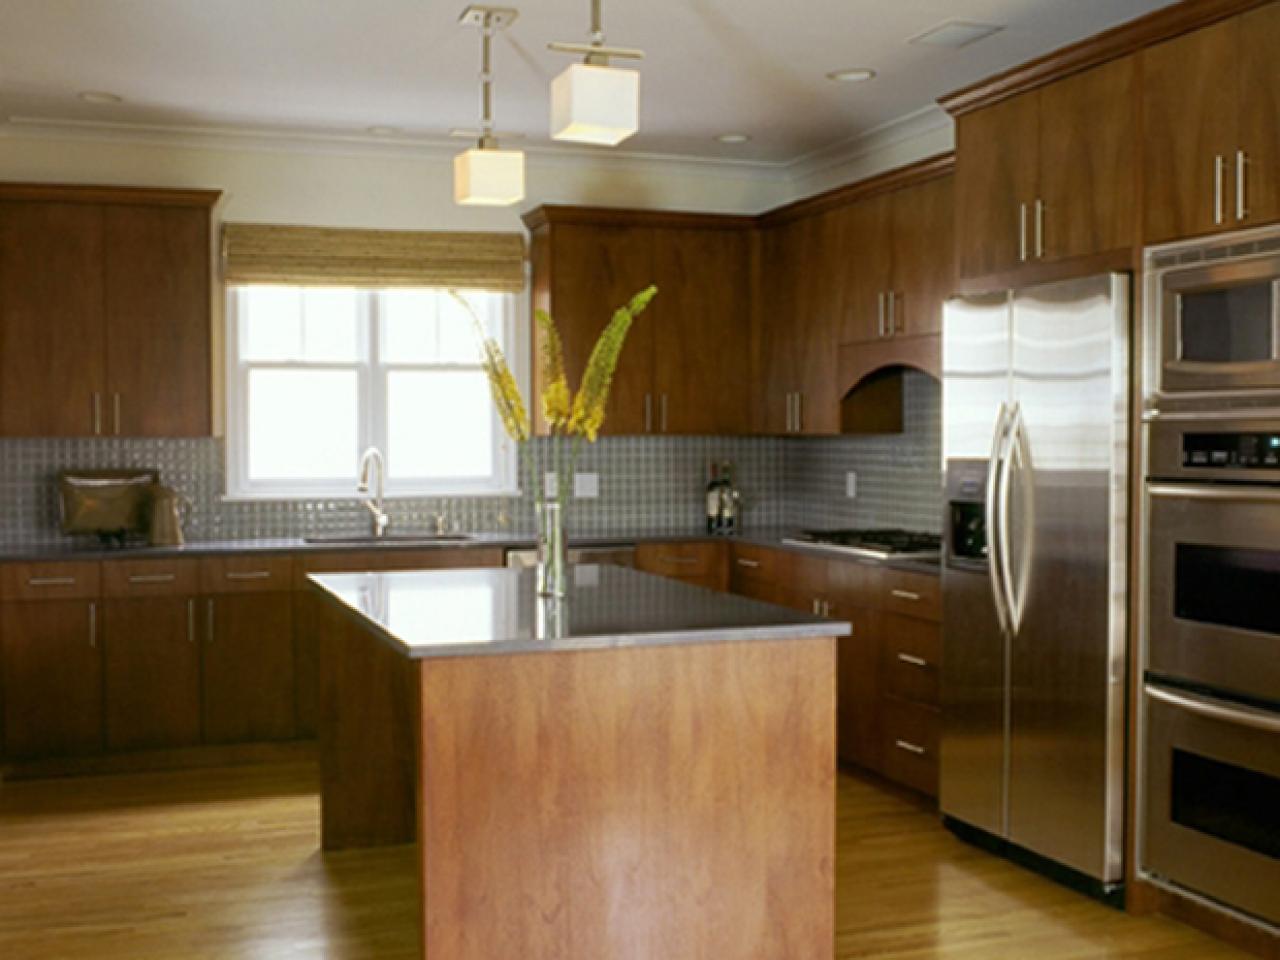 Style Guide For A Contemporary Kitchen HGTV